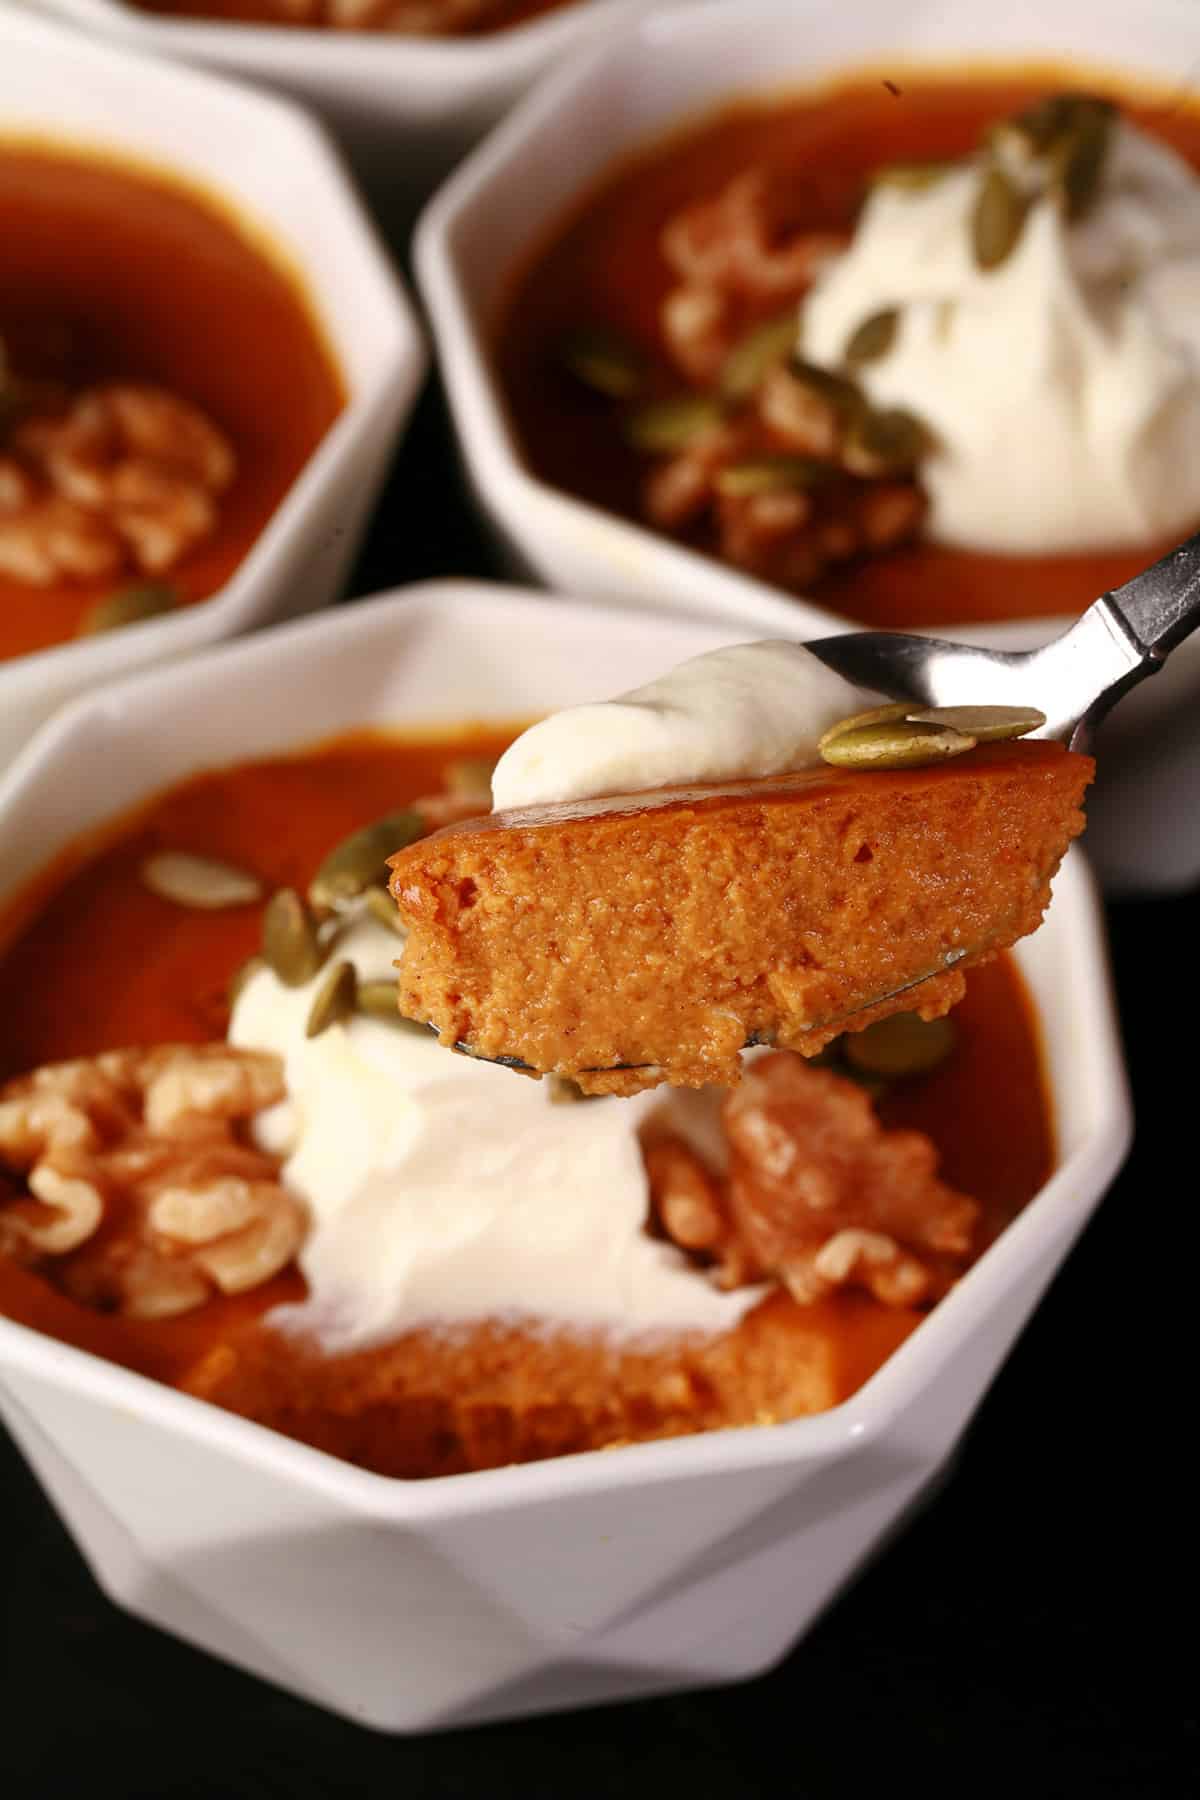 A ramekin of pumpkin pie custard with whipped cream and walnuts. A spoonful of custard is in the foreground.